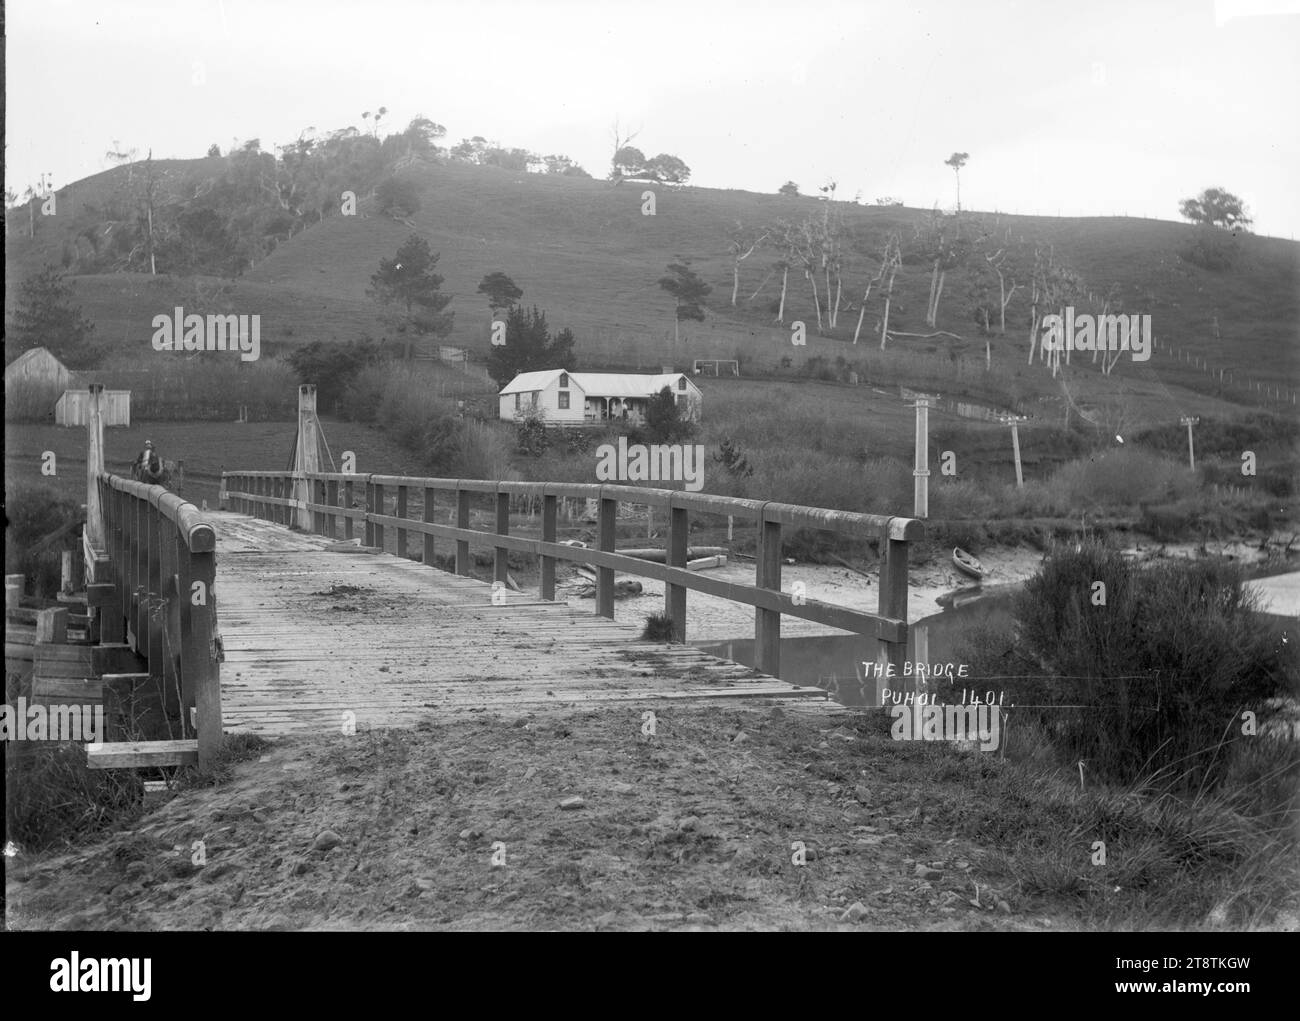 Bridge across the Puhoi River, Puhoi, View of the river and wooden bridge. There is a house and telegraph posts across the river on the opposite bank. A man on a horse is at the far end of the bridge. Photograph taken 1900-1930 Stock Photo